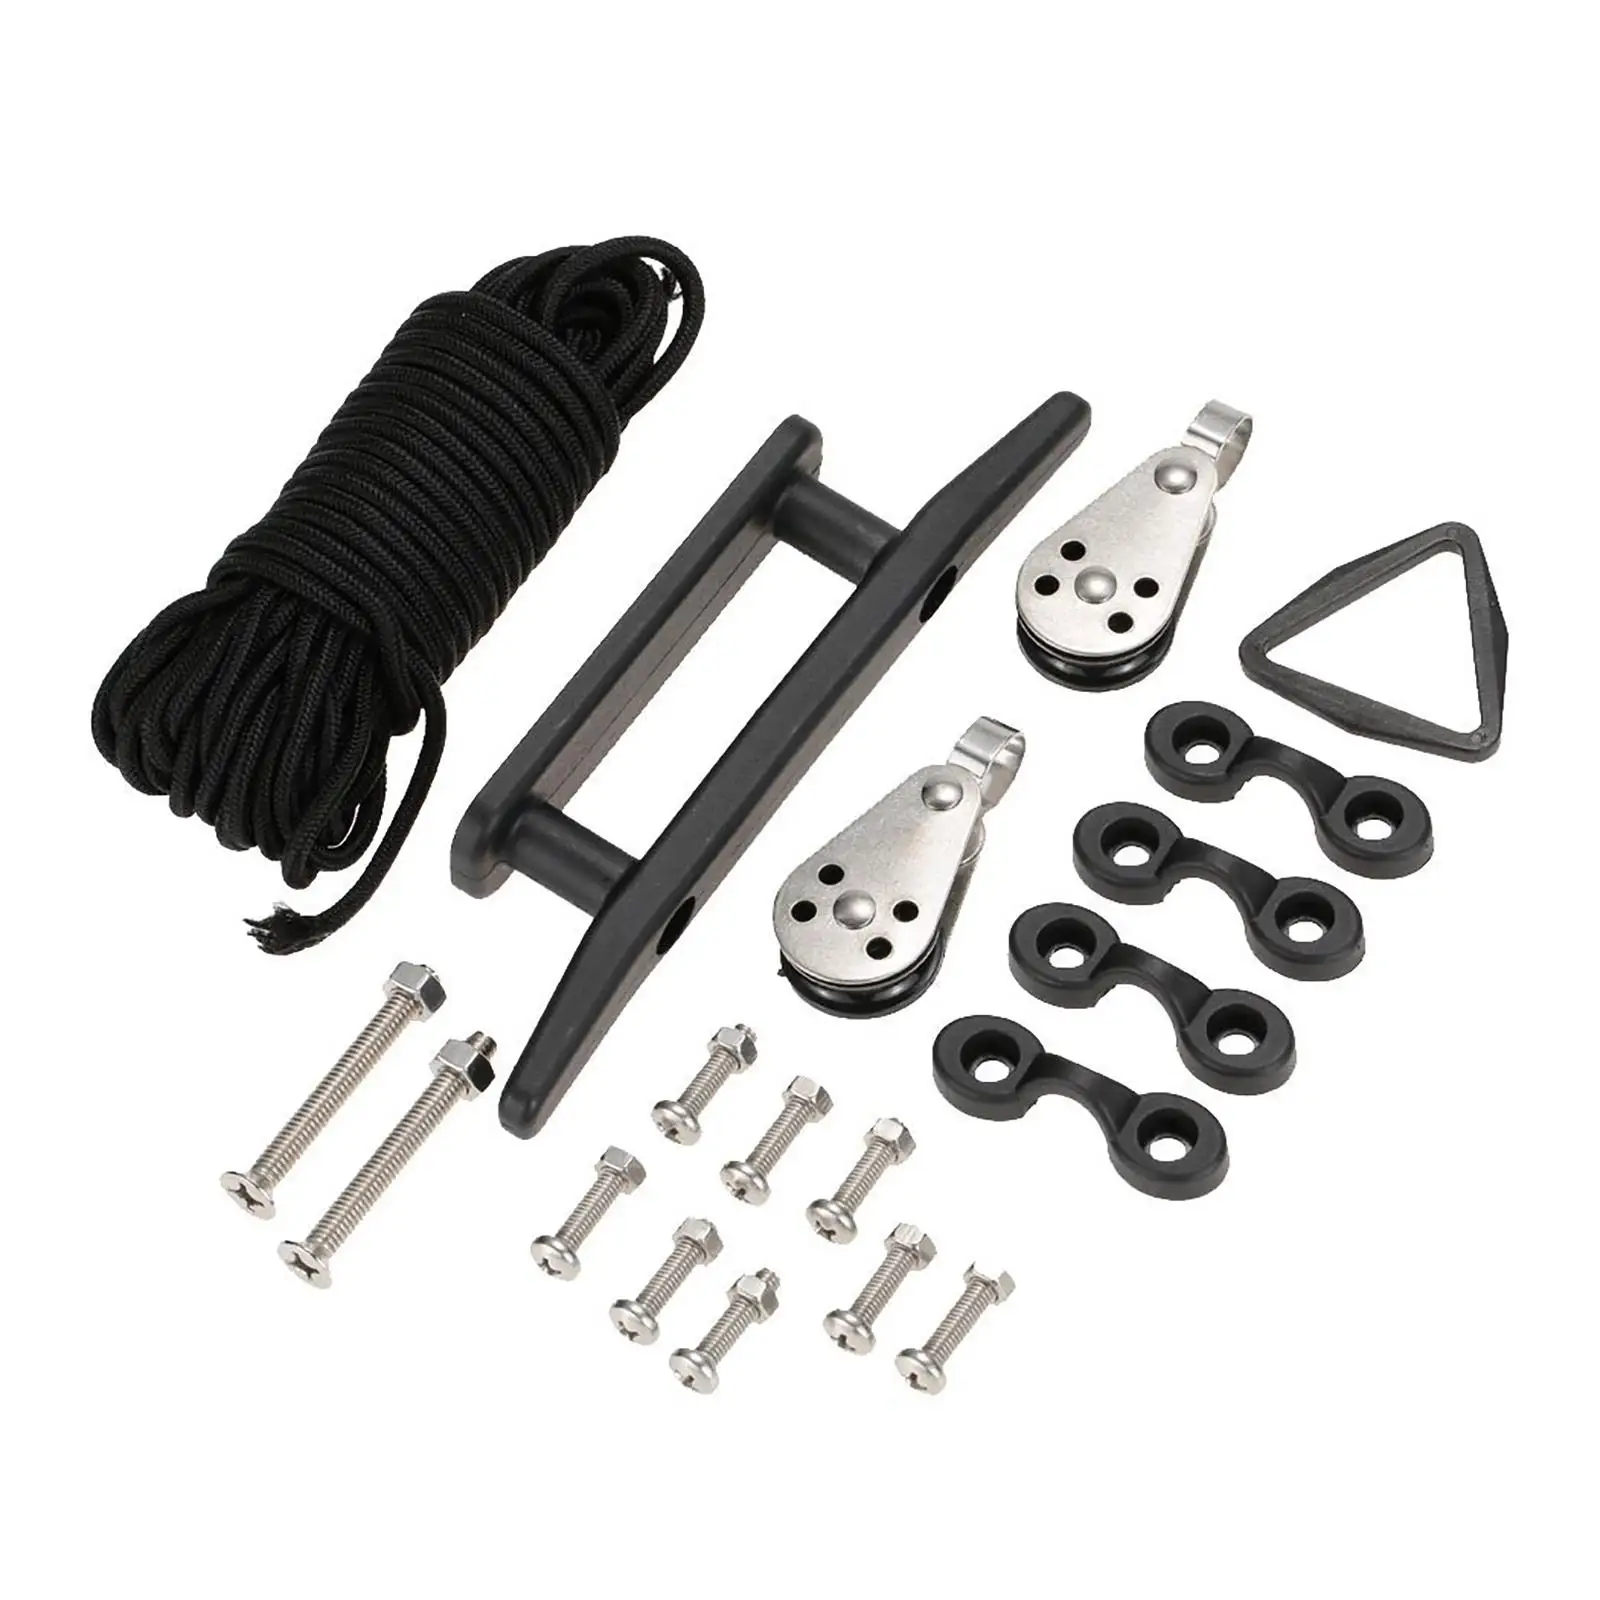 Kayak Accessories Yachting Anchor Trolley Kit Tether Rope Pulley Set Speedboat Nylon Rope Set